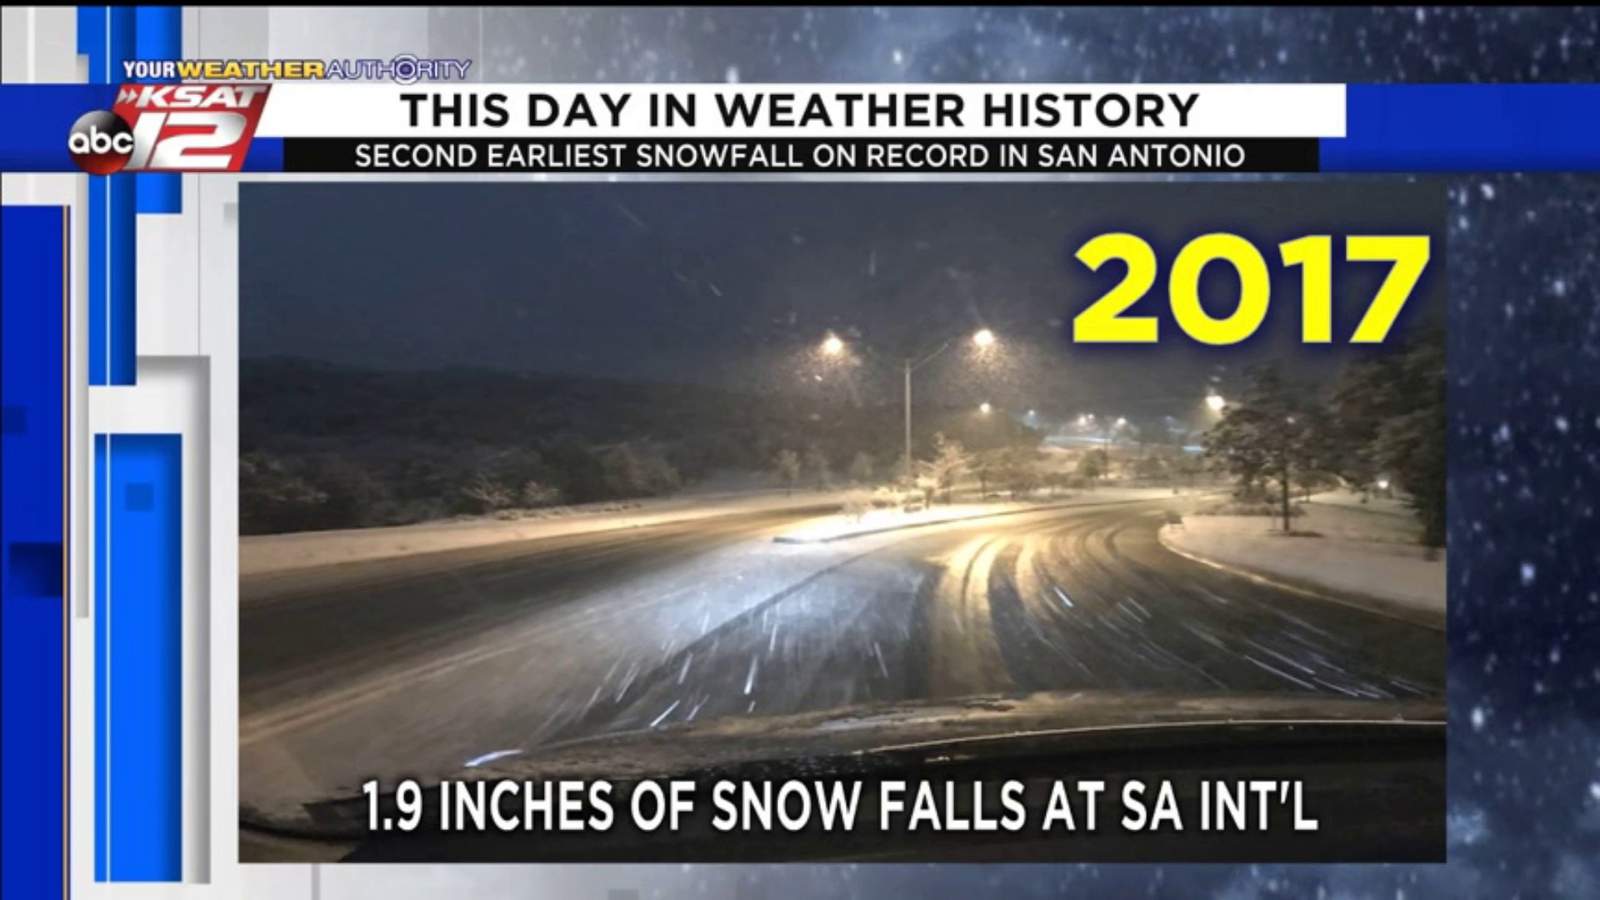 This Day in Weather History: December 7